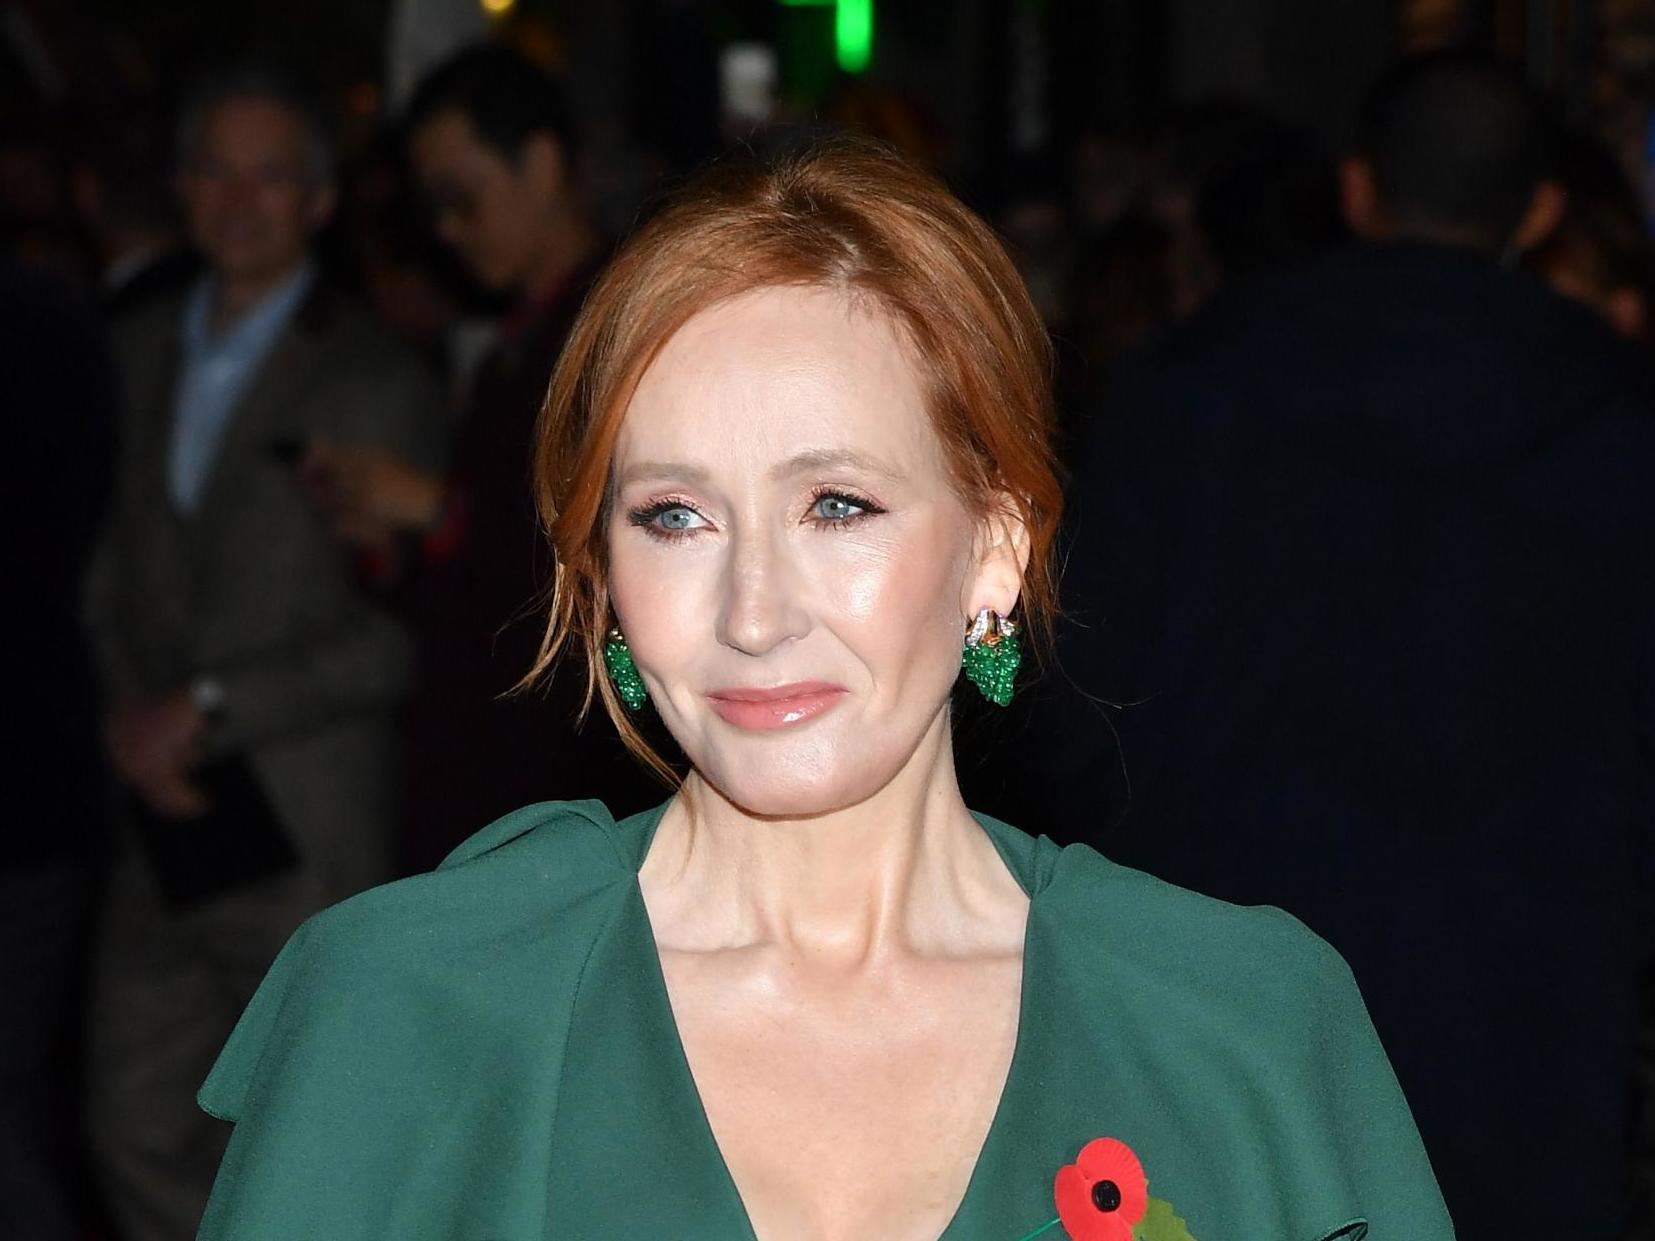 JK Rowling receives apology from children's site after threatening legal action over claims she 'harmed trans people'